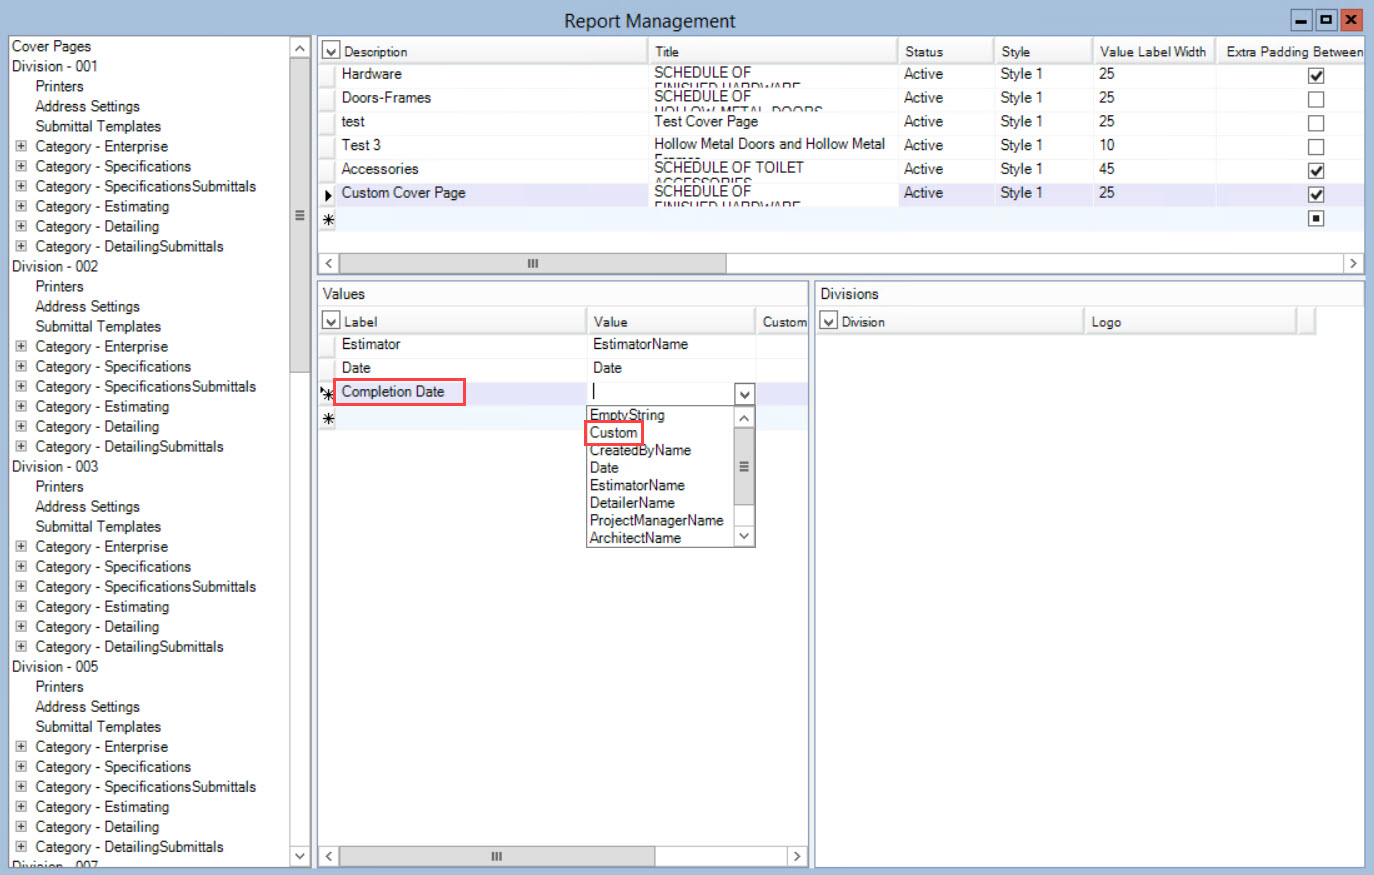 Report Management window, Values pane; shows the an example of a custom label in the Label field and the Value drop-down list.